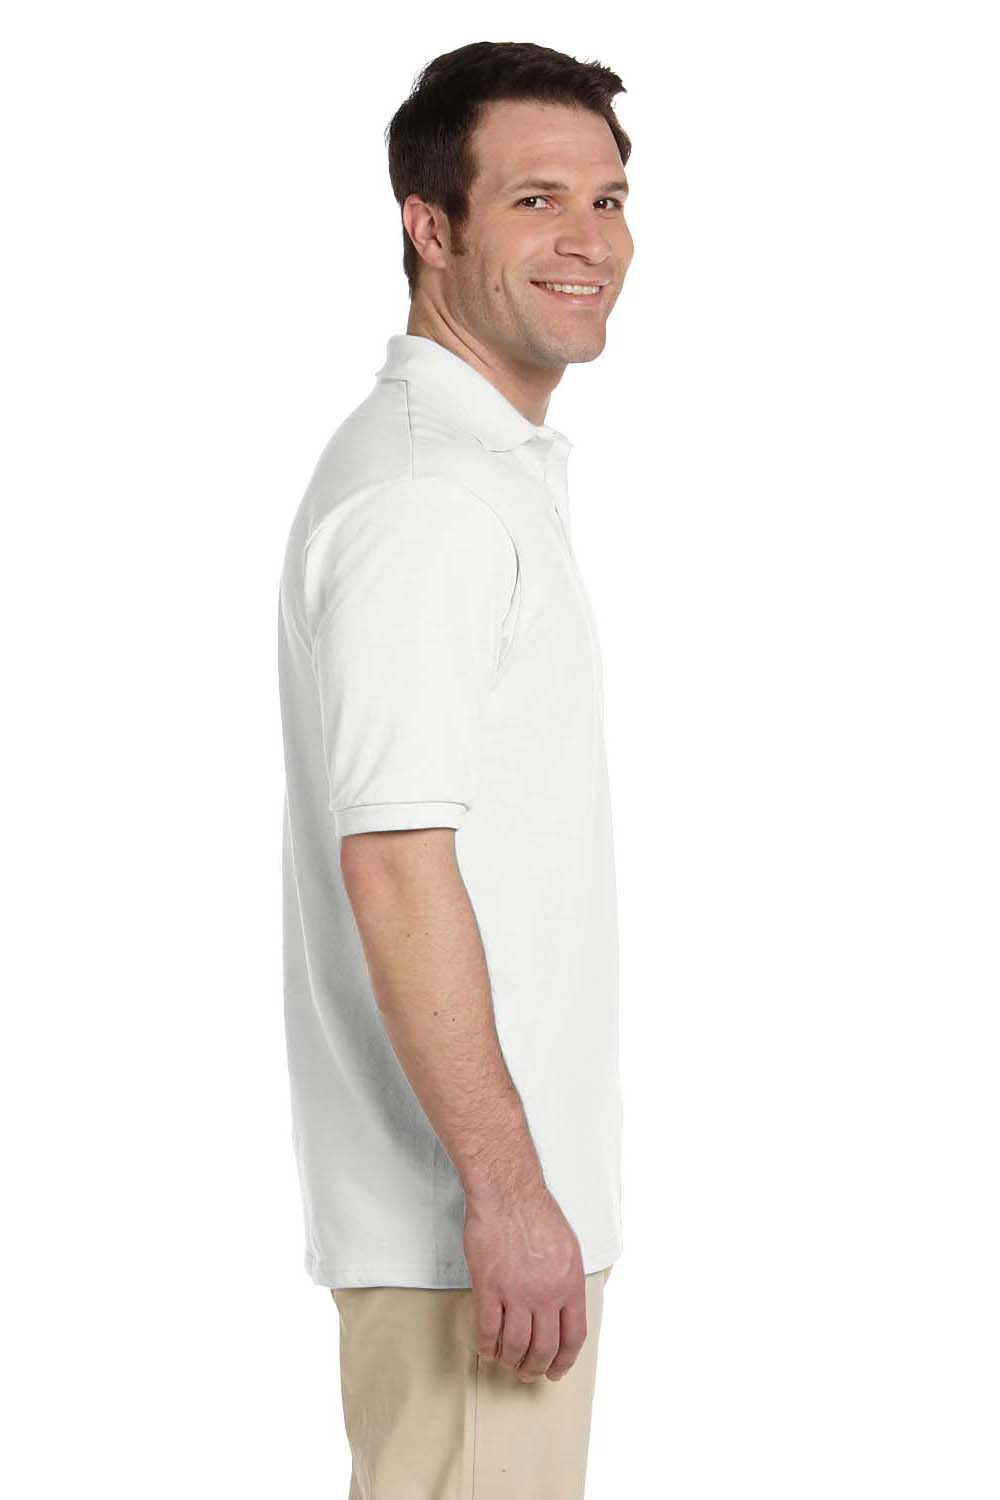 Jerzees 437 Mens SpotShield Stain Resistant Short Sleeve Polo Shirt White Side